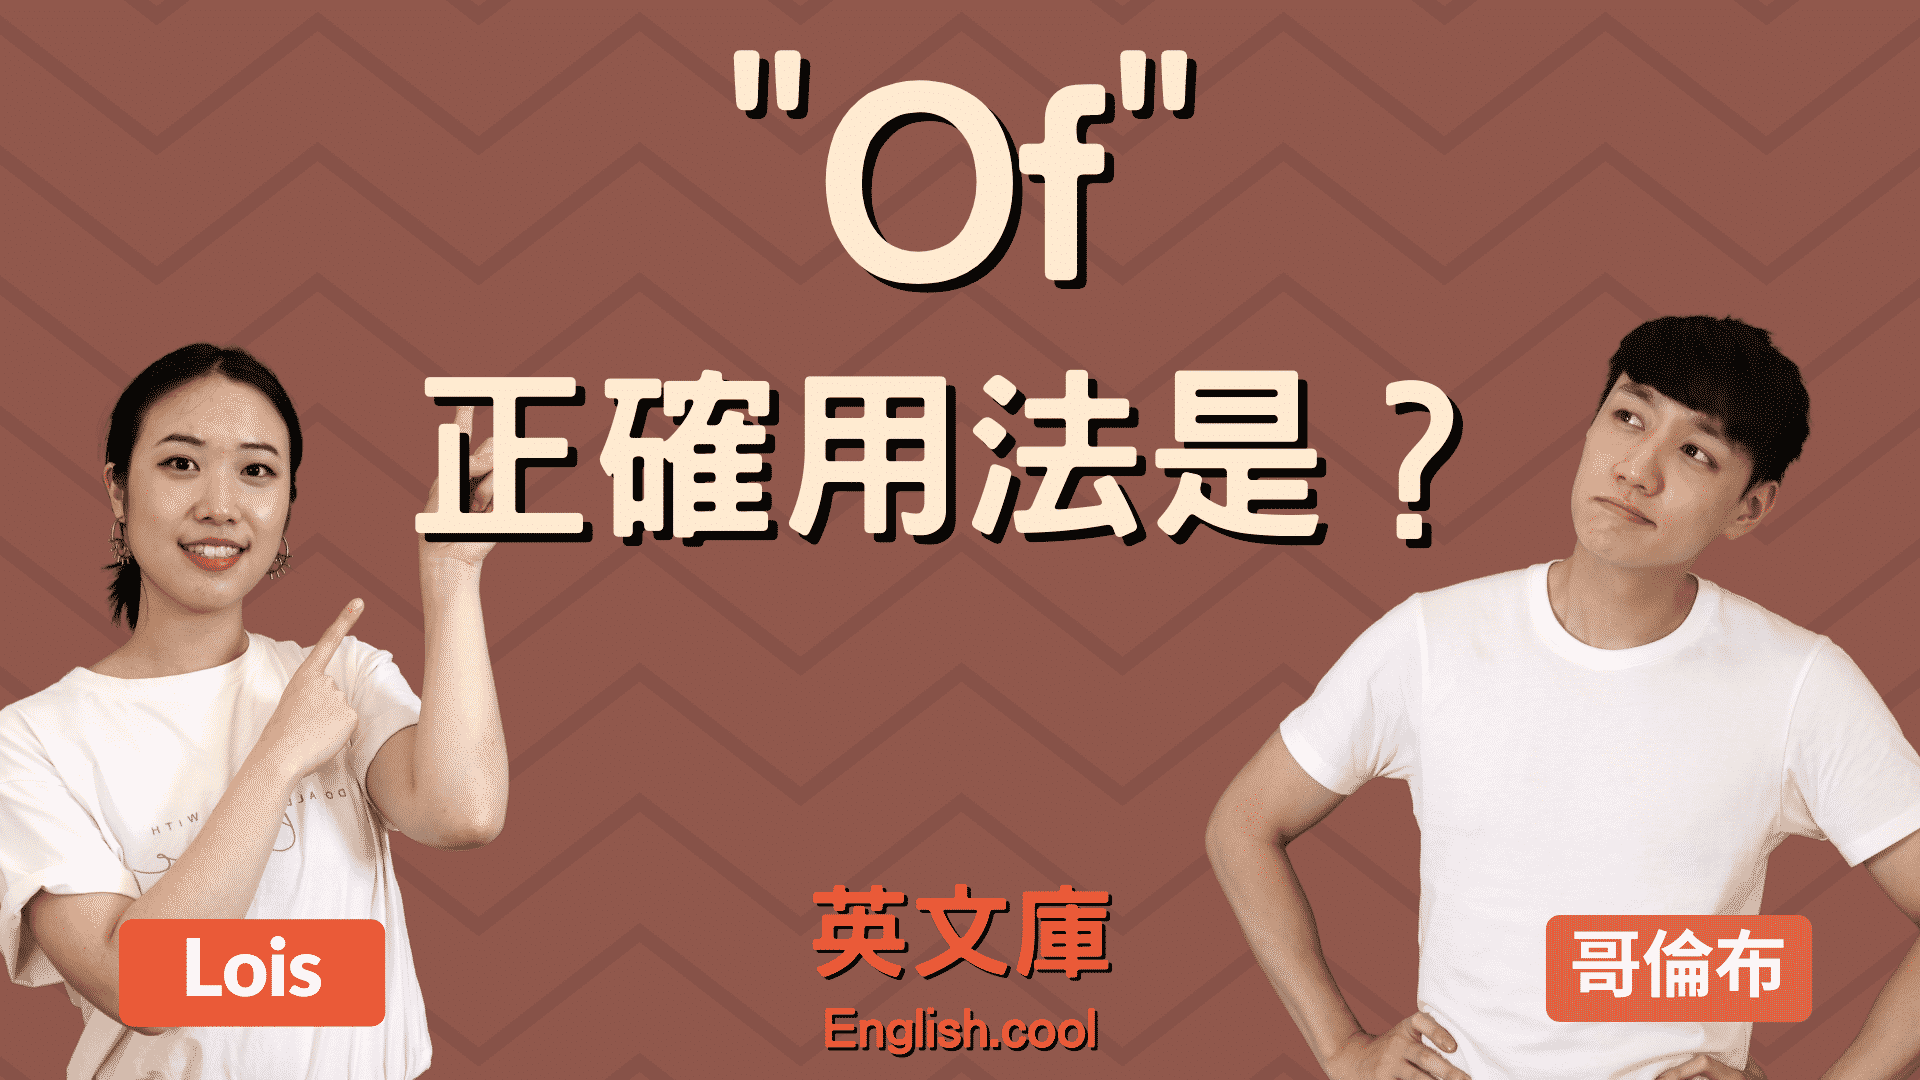 You are currently viewing 「Of」的正確用法是？來看例句搞懂13個用法！